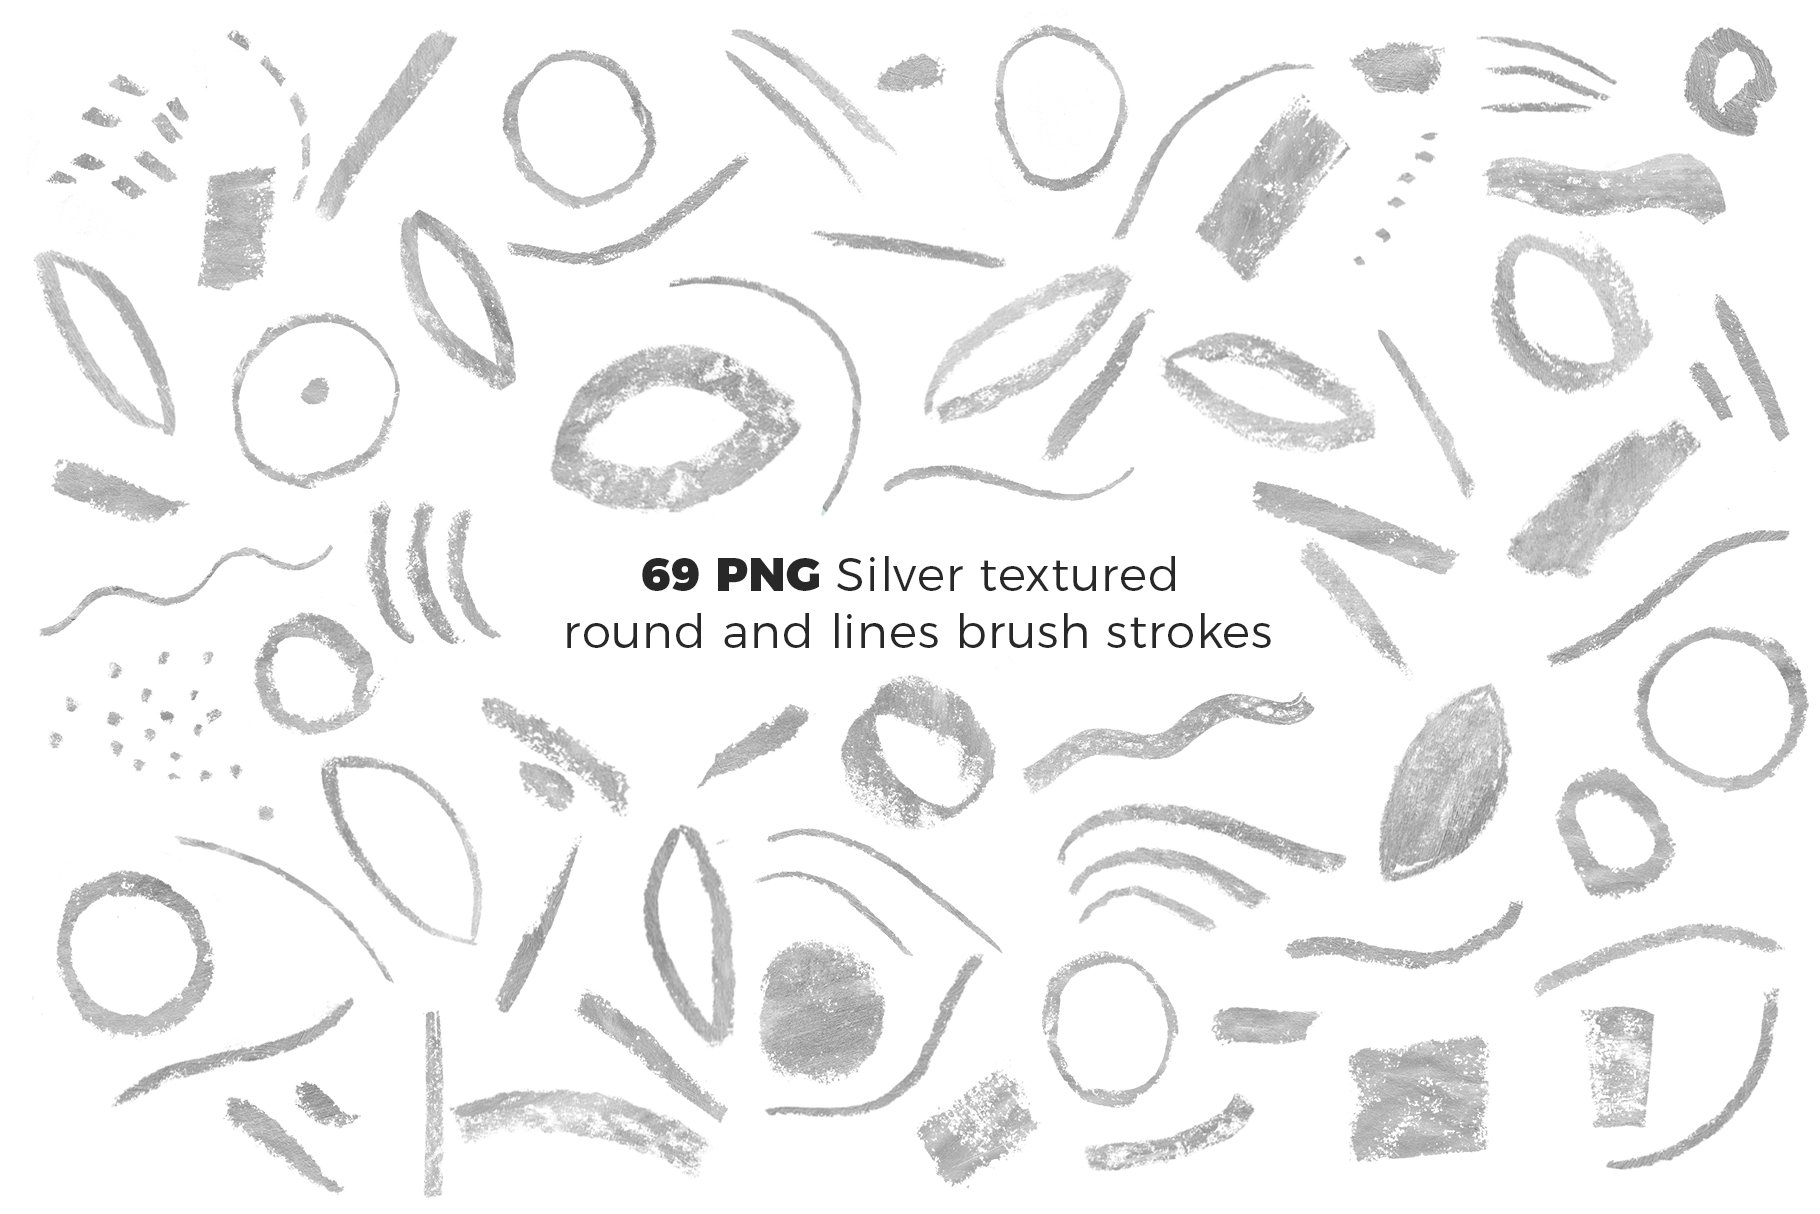 69 png silver textured round and lines brush strokes 465